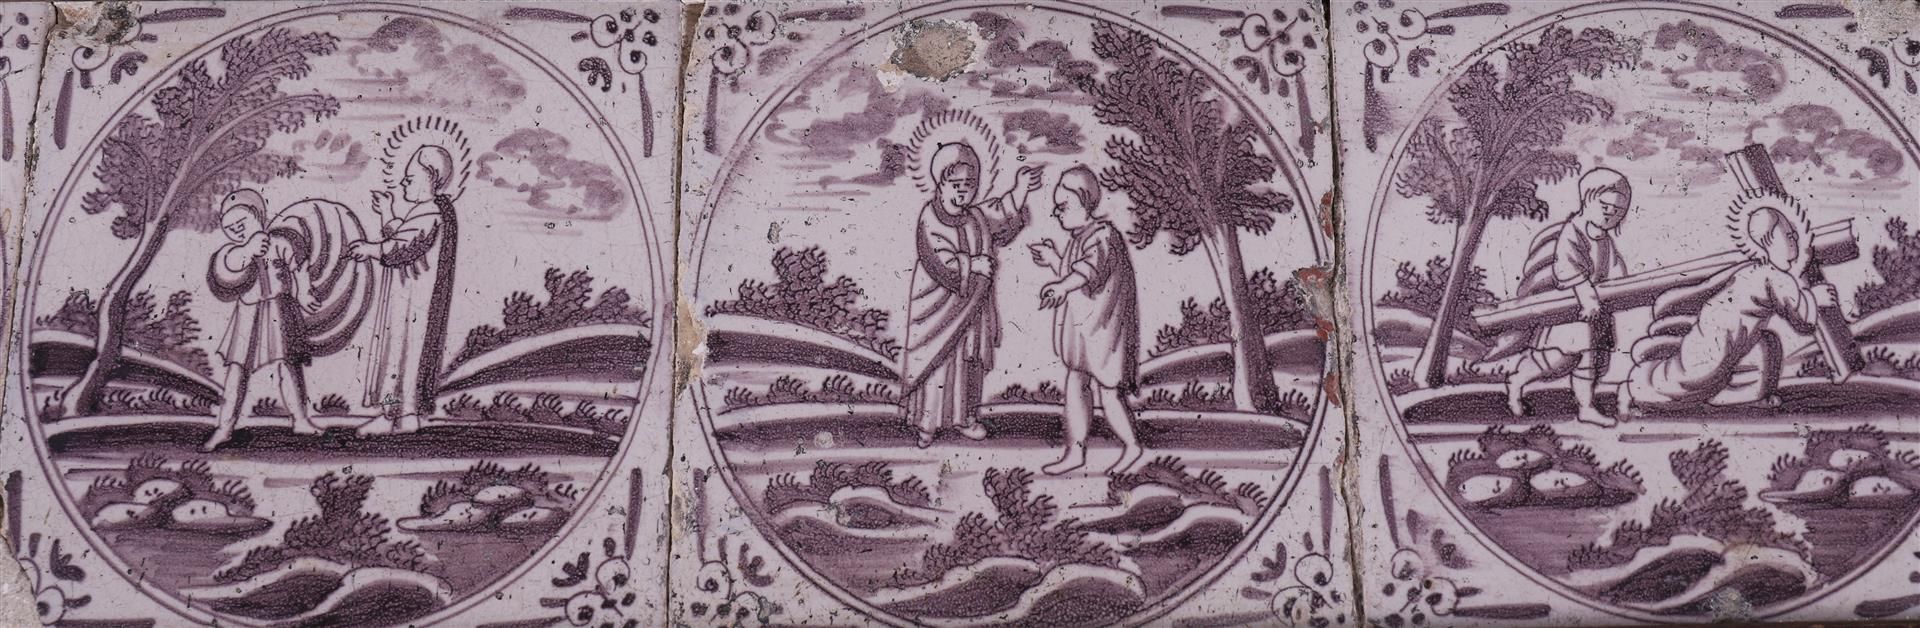 Two tableaus with manganese-colored religious tiles, 18th century. - Bild 3 aus 3